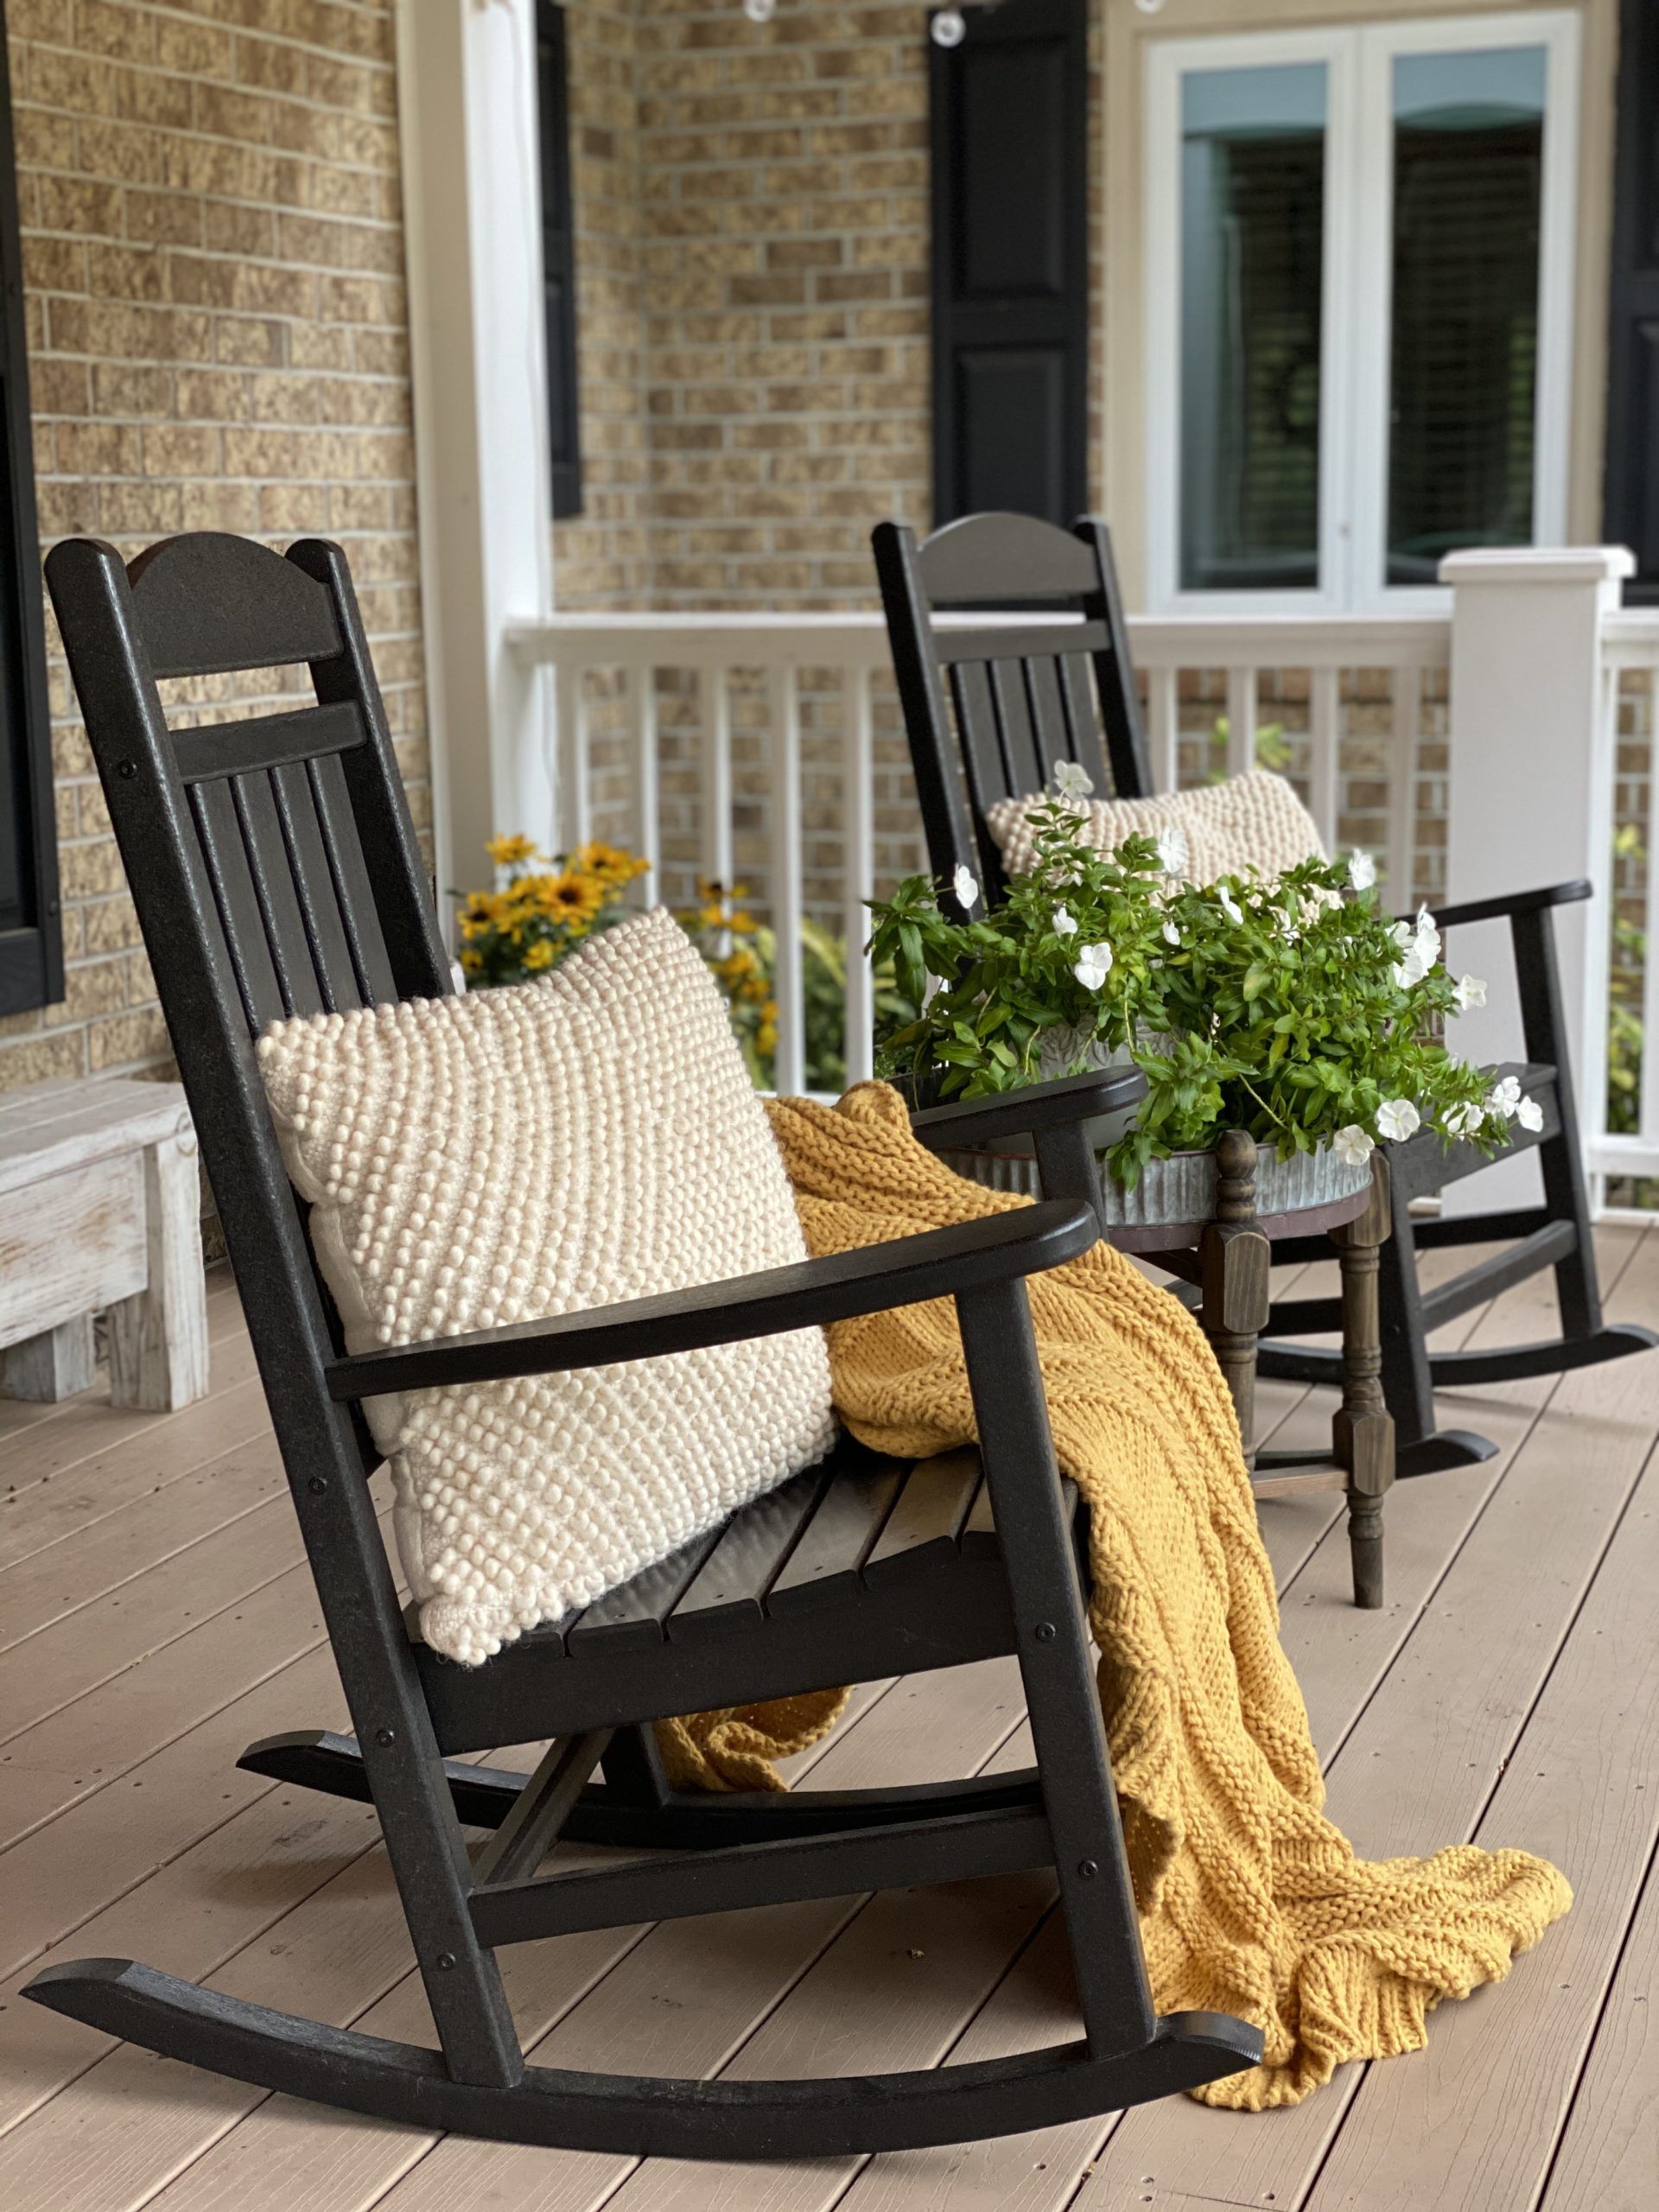 Seating that is sure to please for
  outdoor rocking chairs